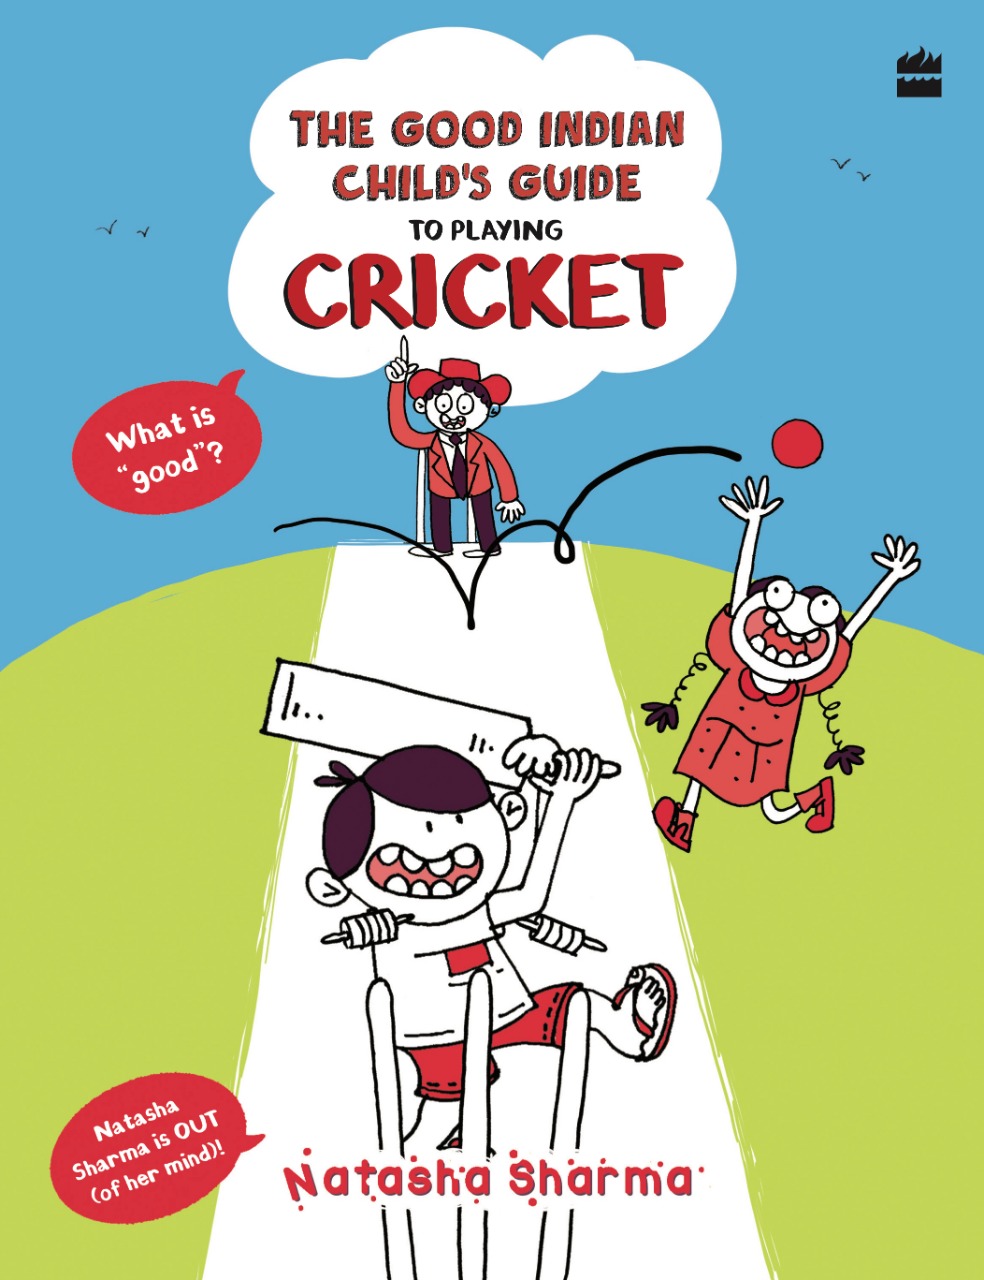 The Good Indian Child's Guide to Playing Cricket by Natasha Sharma